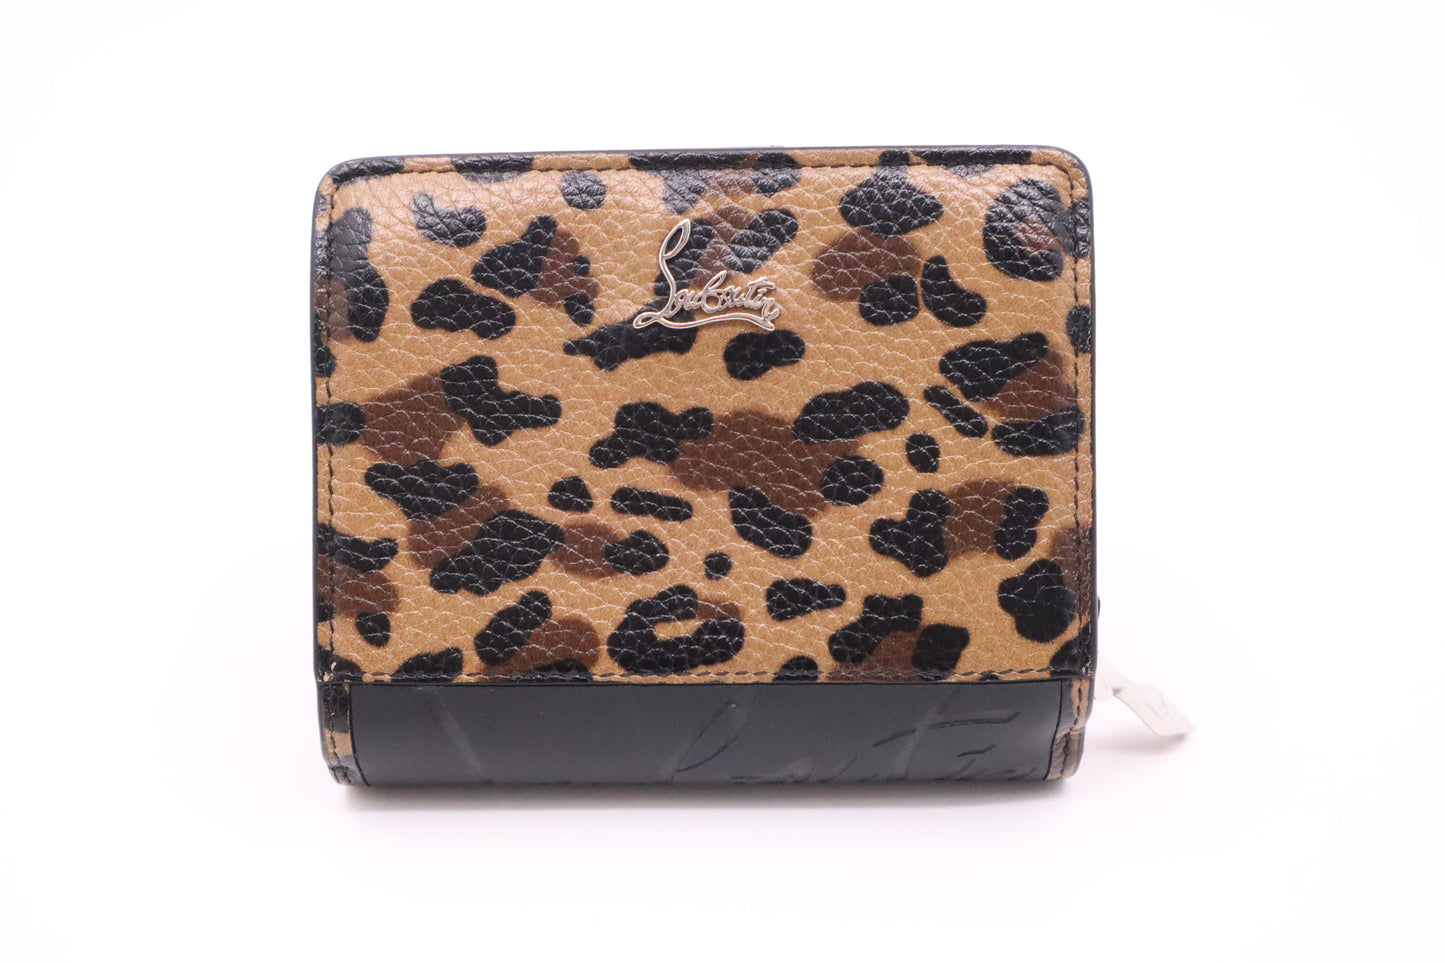 Louboutin Compact Wallet in Leopard Print Canvas